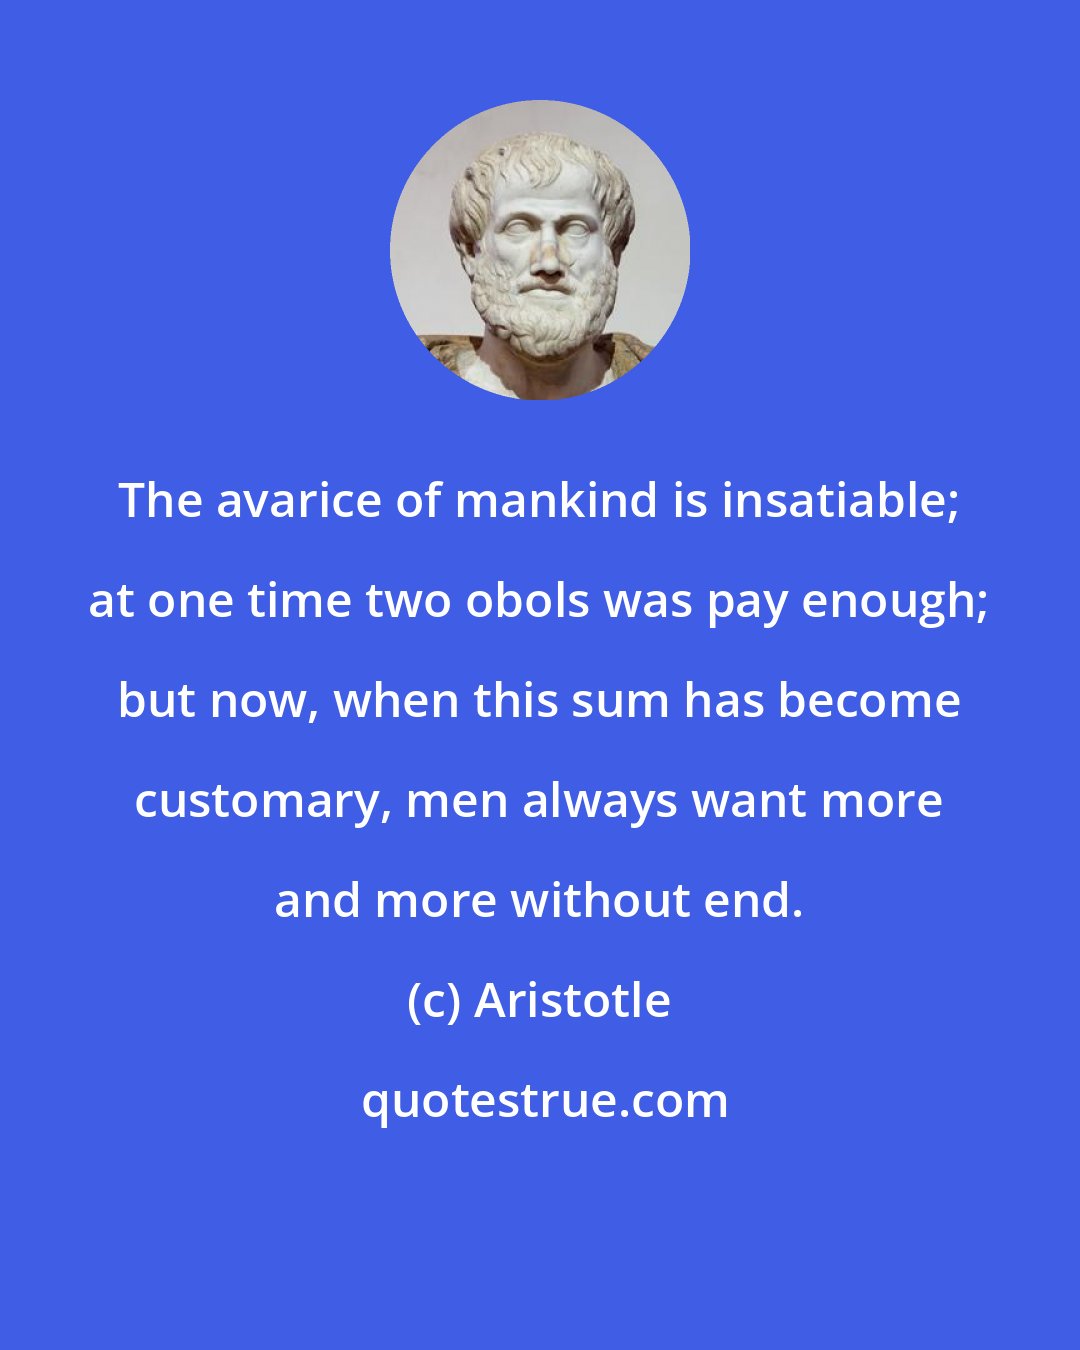 Aristotle: The avarice of mankind is insatiable; at one time two obols was pay enough; but now, when this sum has become customary, men always want more and more without end.